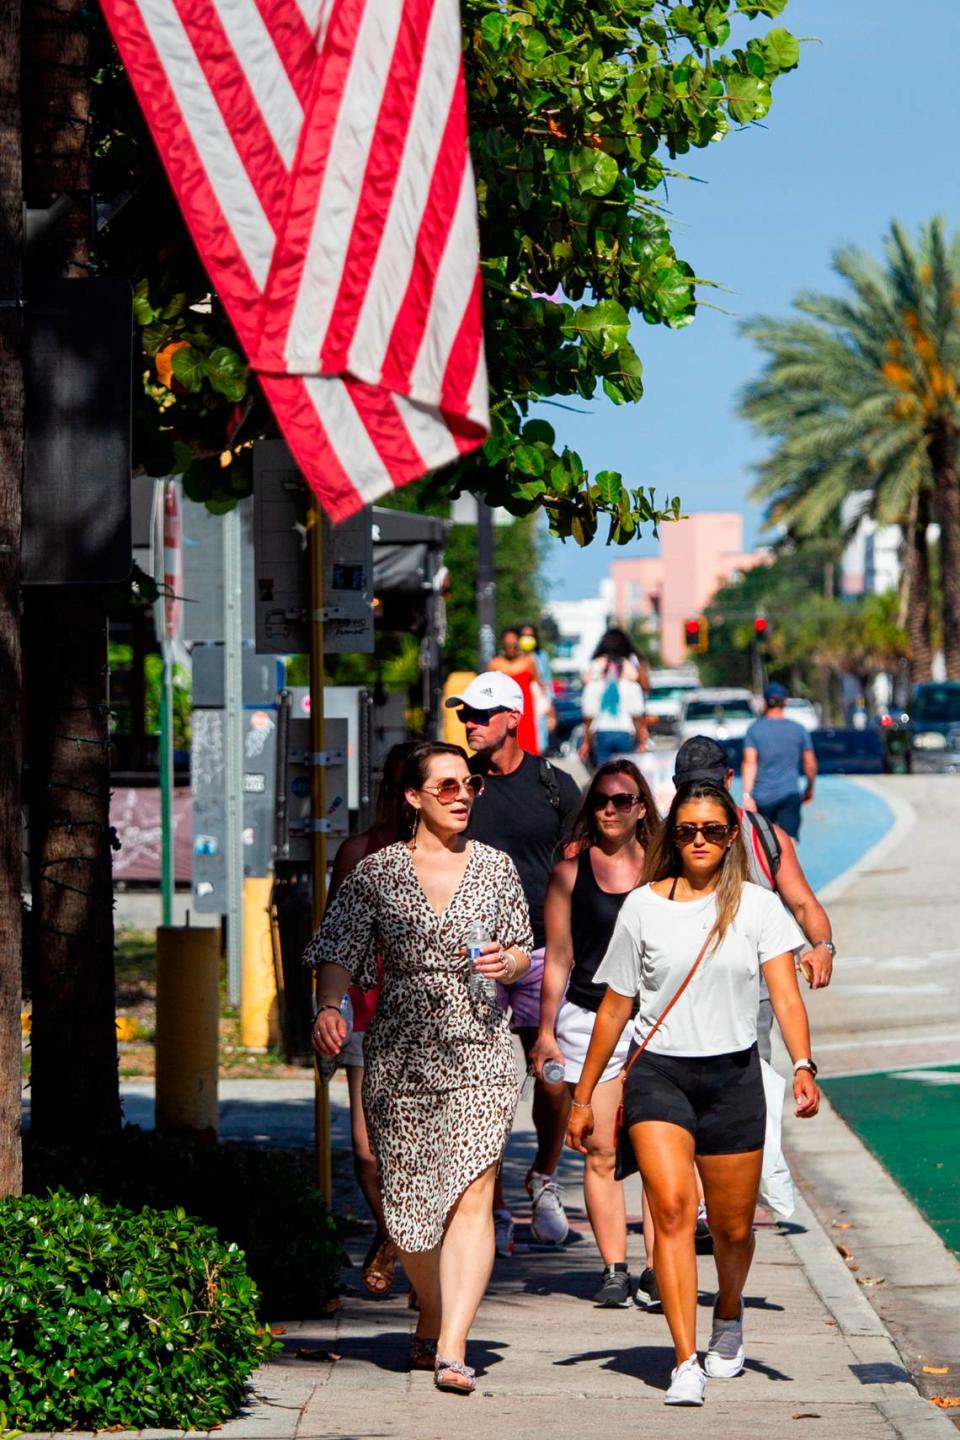 Downtown Fort Lauderdale saw a 14% uptick in pedestrian foot traffic between 2018 and 2022, based on data from the Las Olas Boulevard Association and the Fort Lauderdale Downtown Development Authority’s latest retail market report 2023. MATIAS J. OCNER/mocner@miamiherald.com